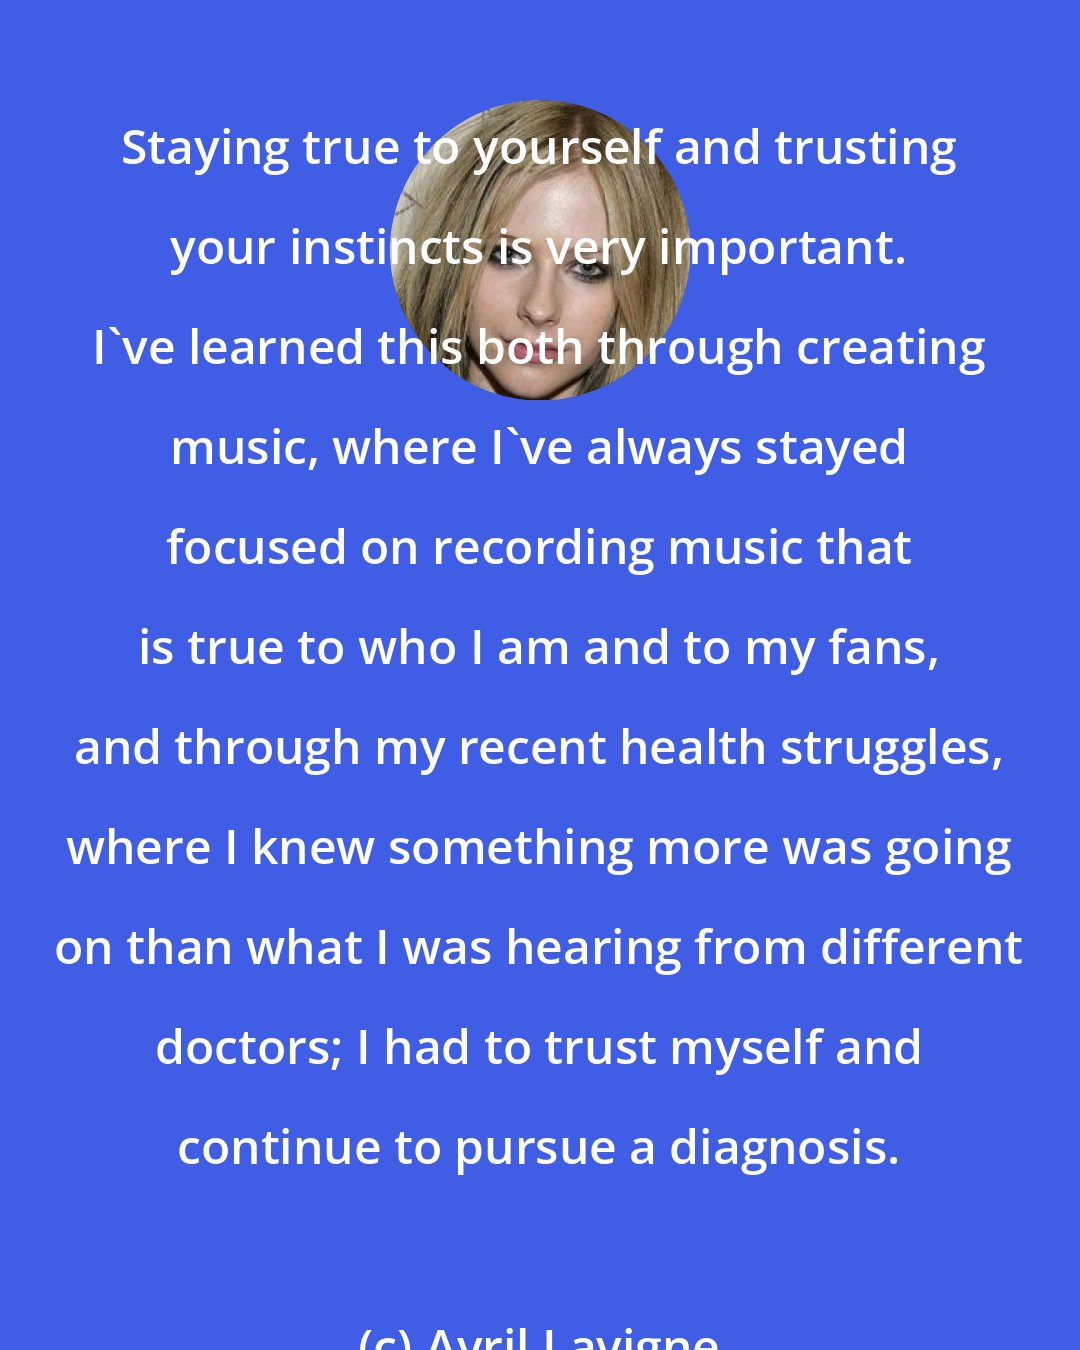 Avril Lavigne: Staying true to yourself and trusting your instincts is very important. I've learned this both through creating music, where I've always stayed focused on recording music that is true to who I am and to my fans, and through my recent health struggles, where I knew something more was going on than what I was hearing from different doctors; I had to trust myself and continue to pursue a diagnosis.